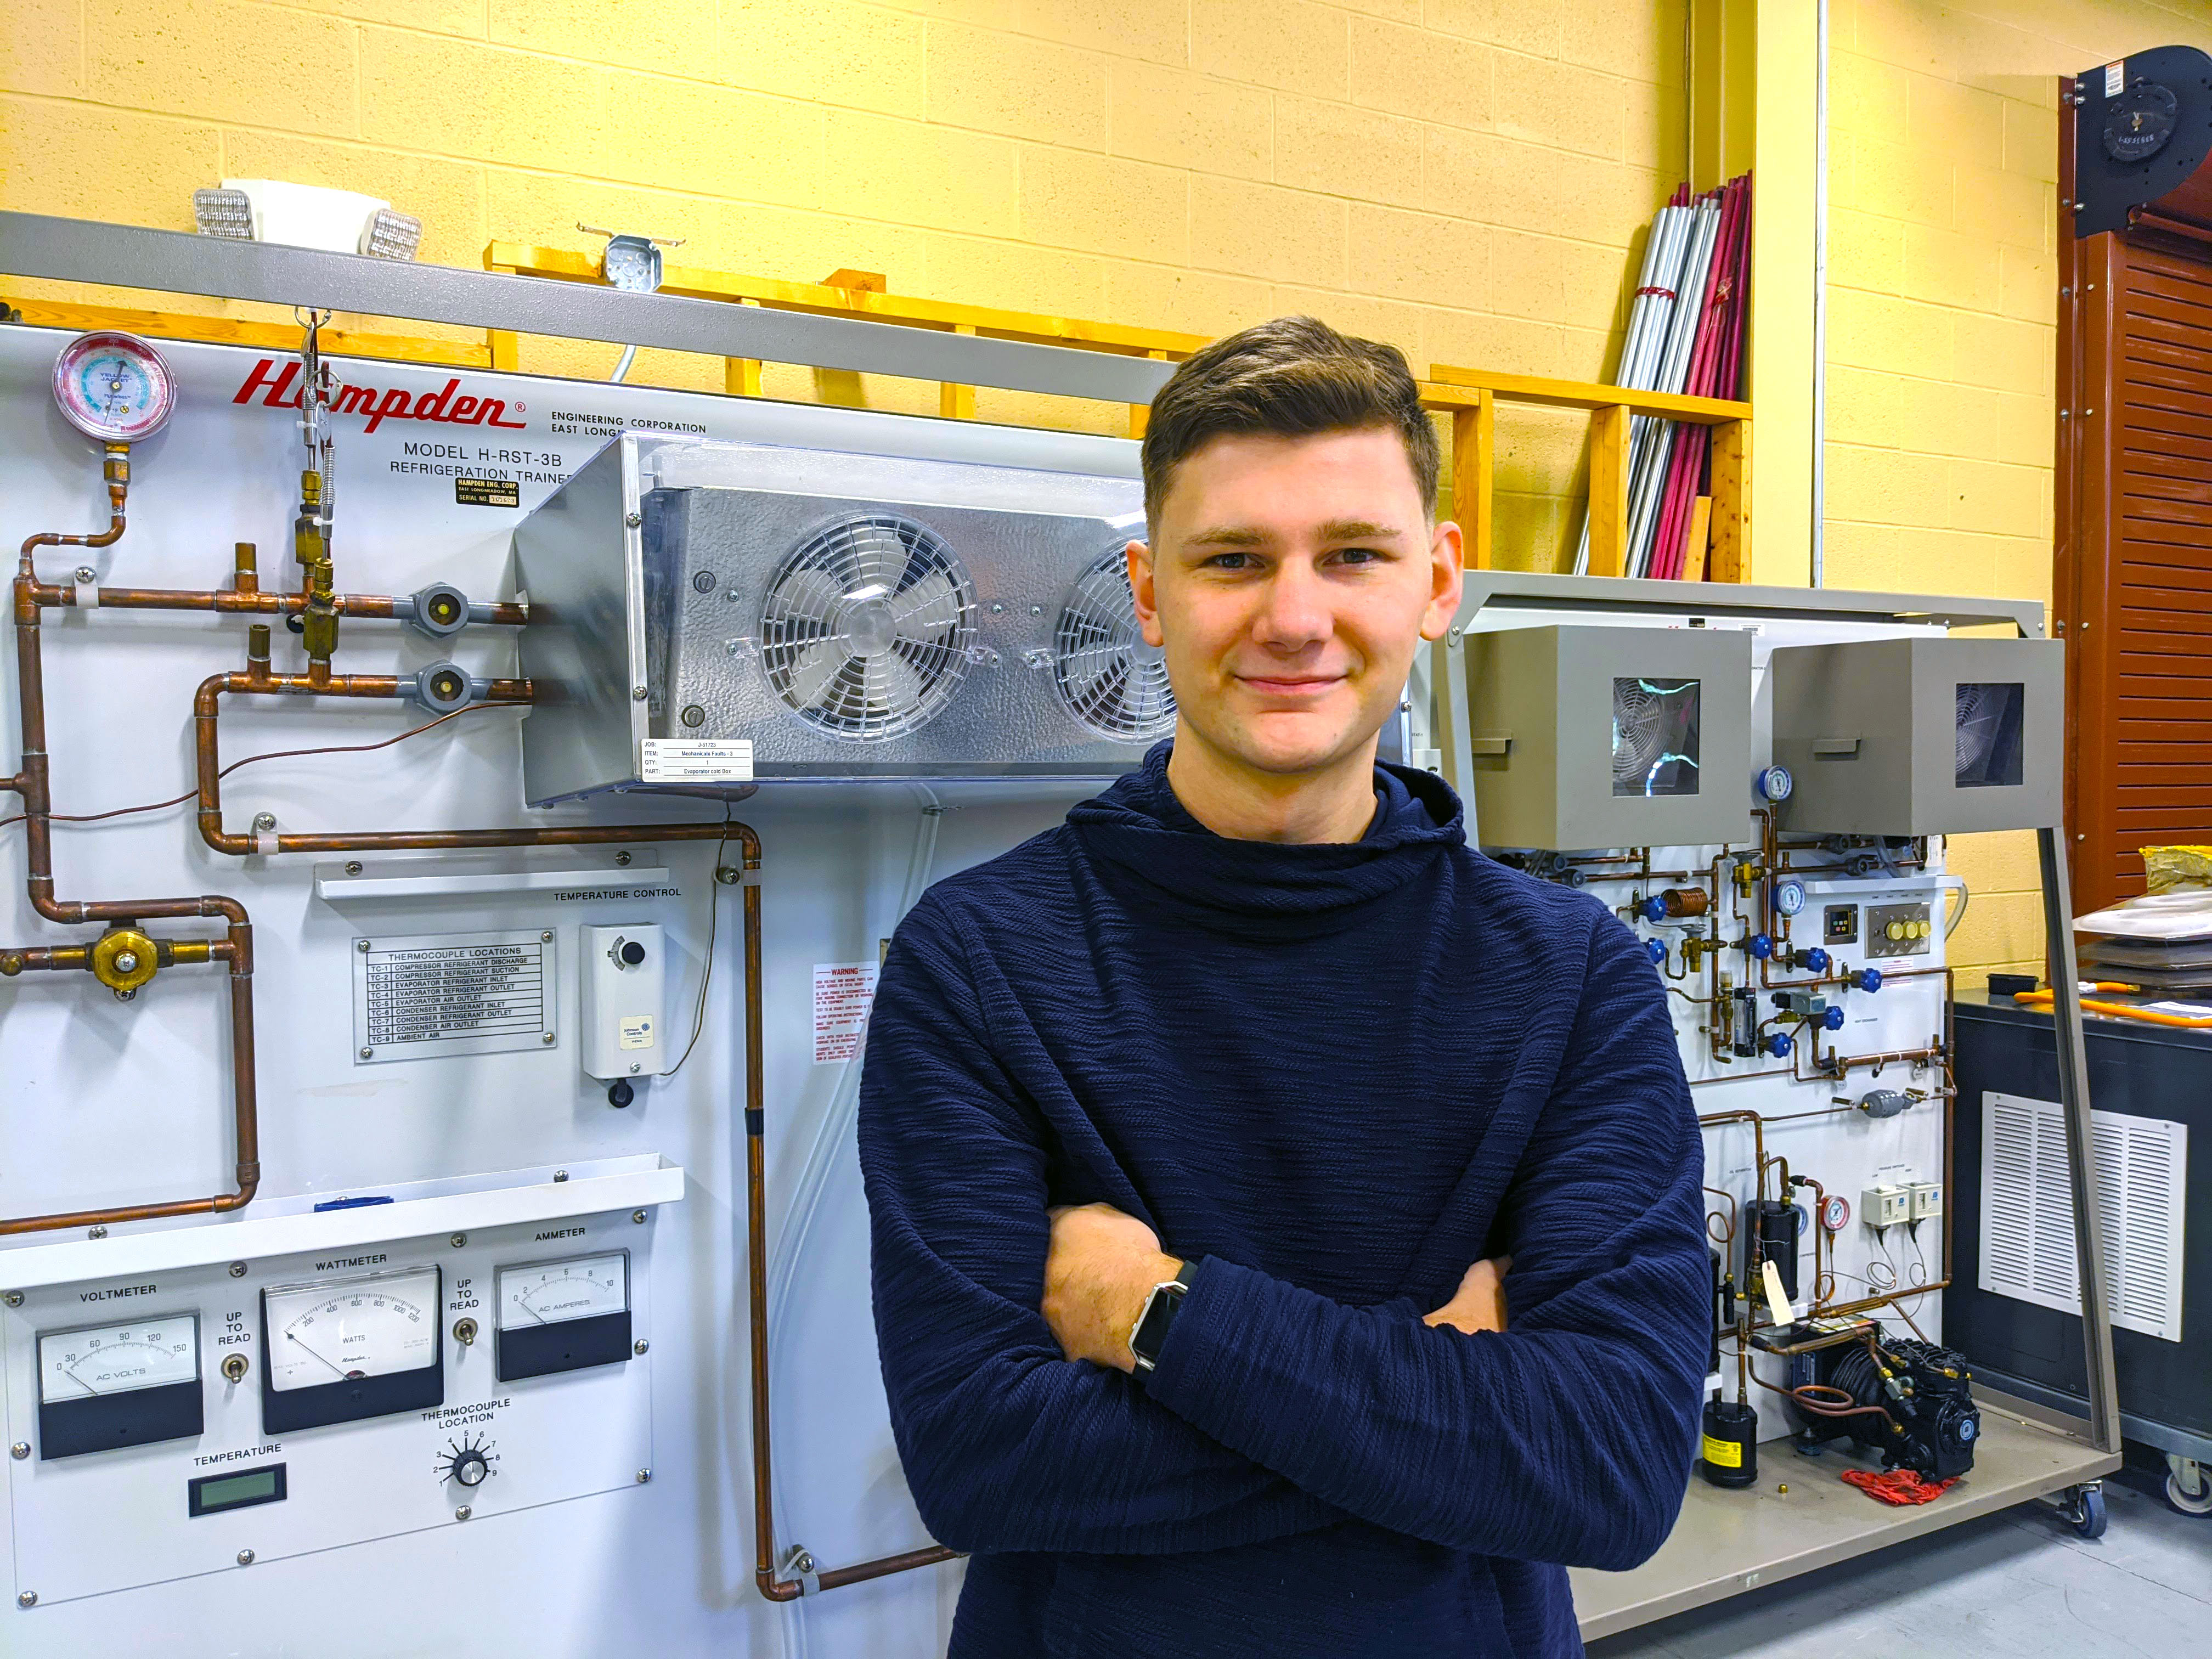 Sam Miles stands in front of a heating and air unit in the HVACR classroom.